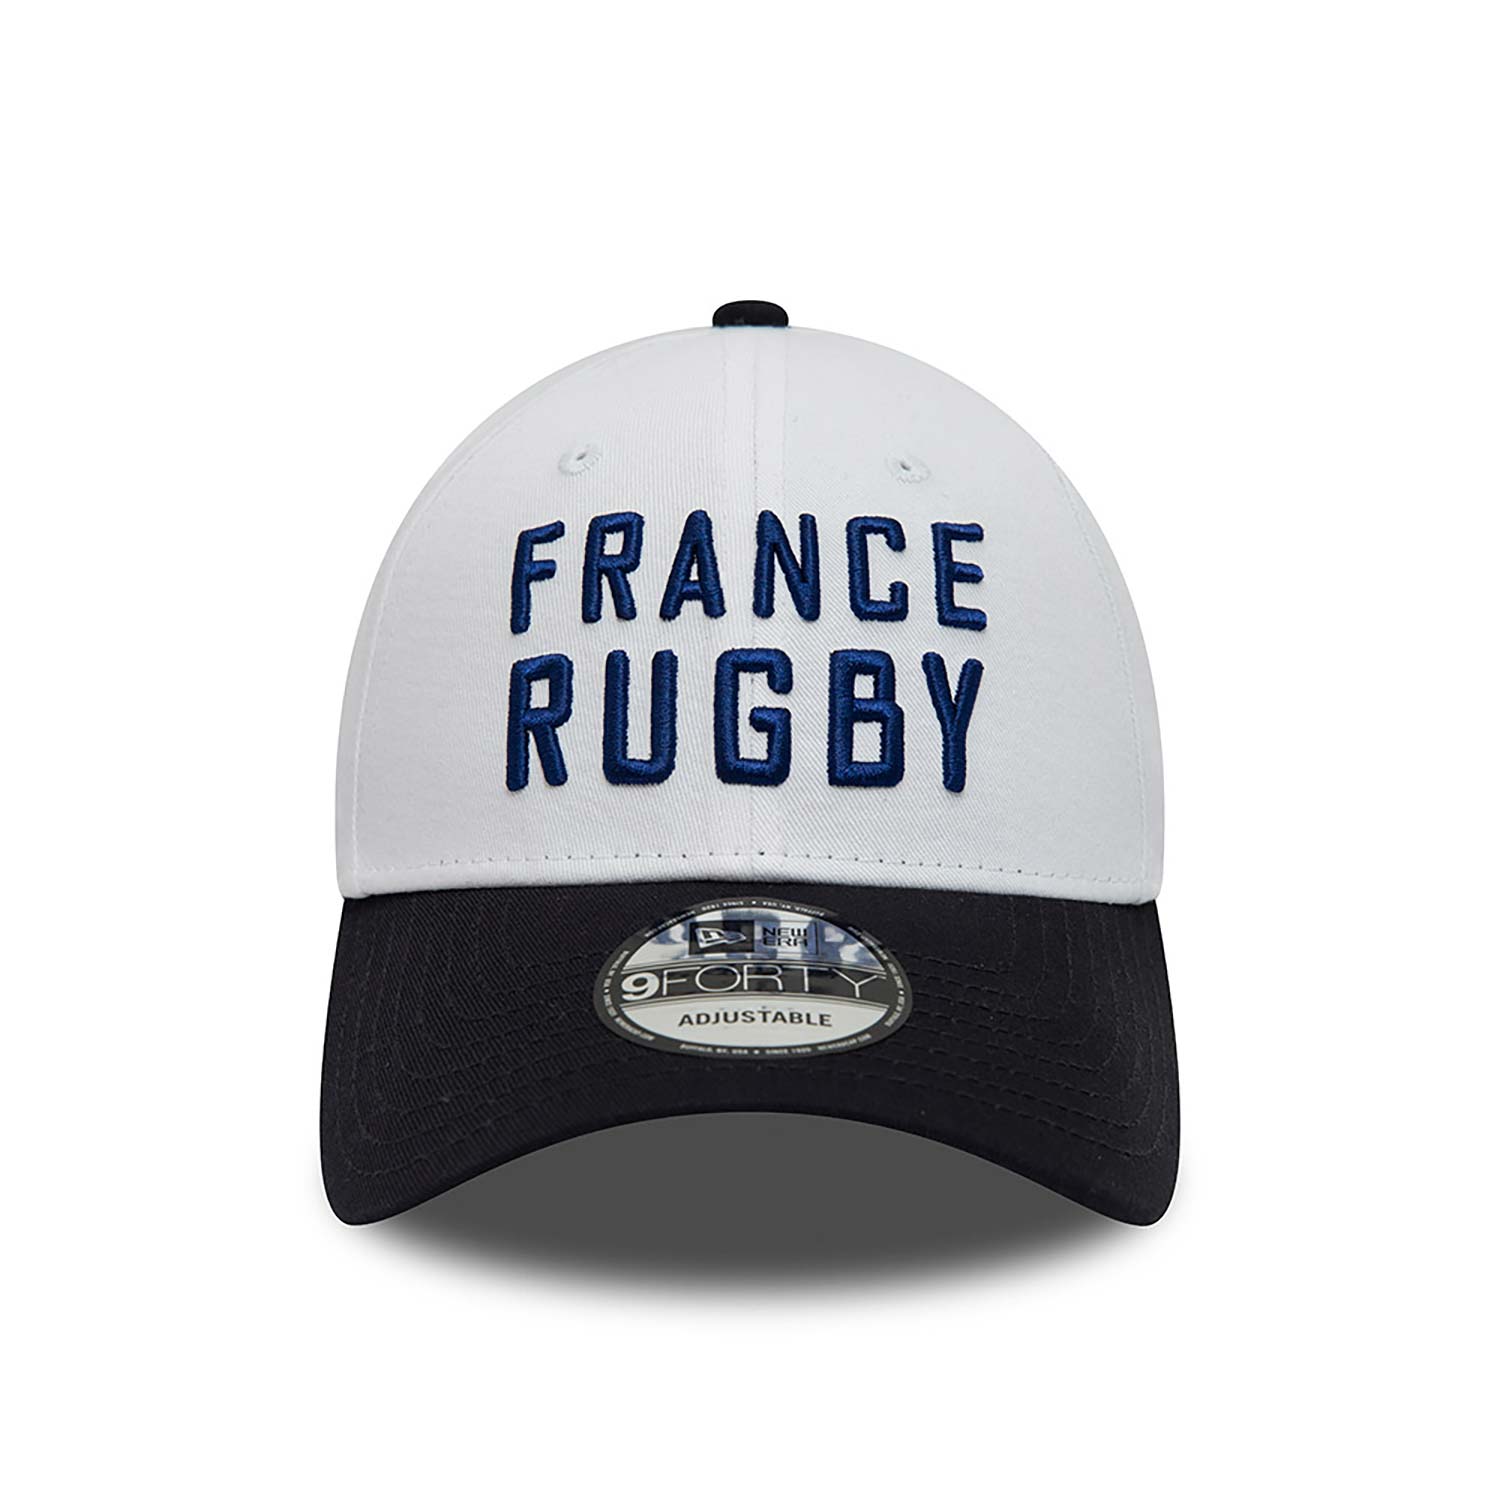 French Federation Of Rugby Two Tone White 9FORTY Adjustable Cap